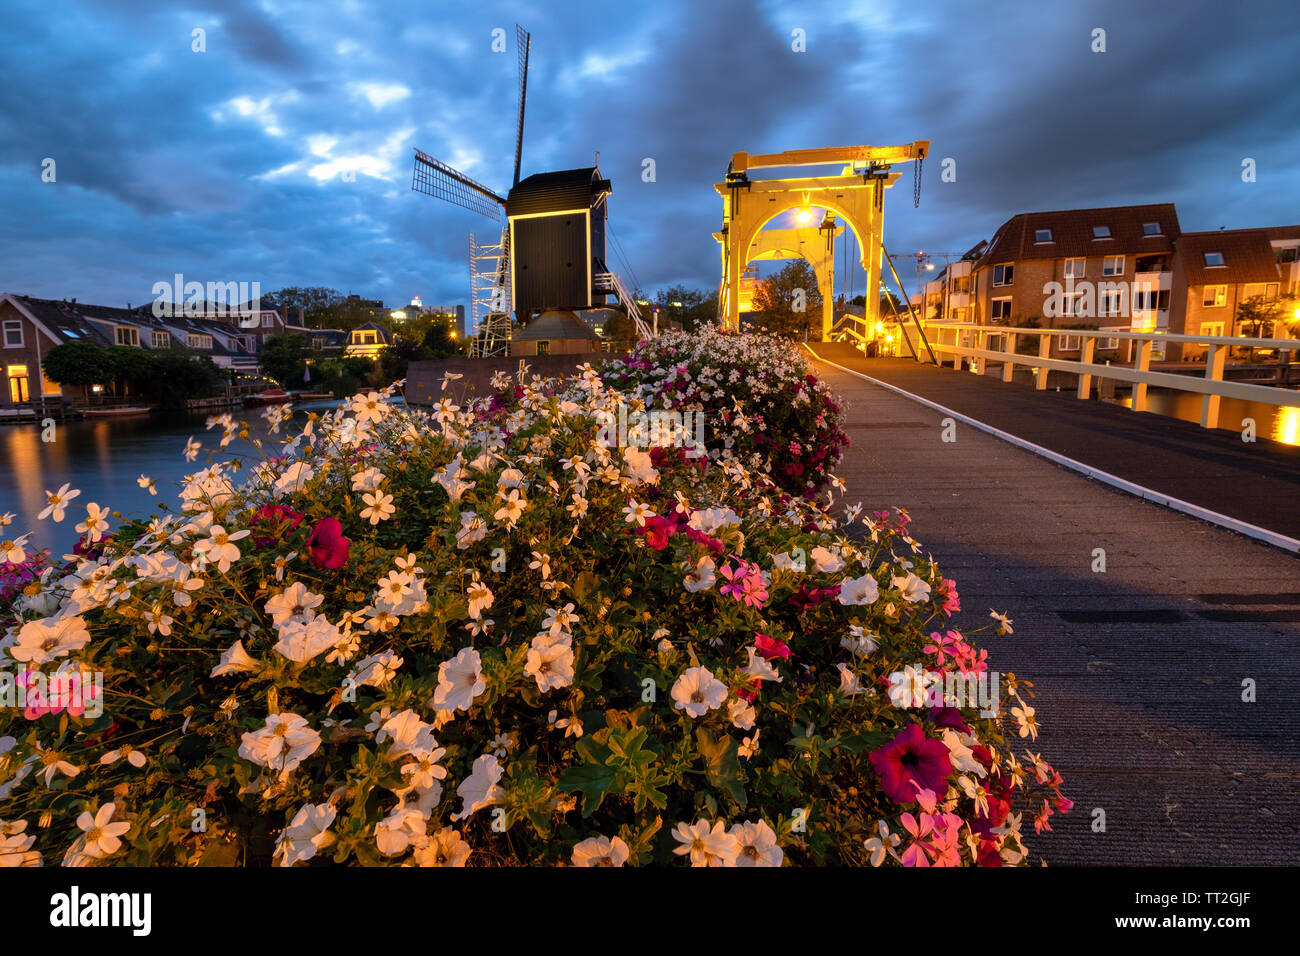 Drawbridge and Windmill at Night with Blooming Flowers, Leiden, South Holland, Netherlands Stock Photo